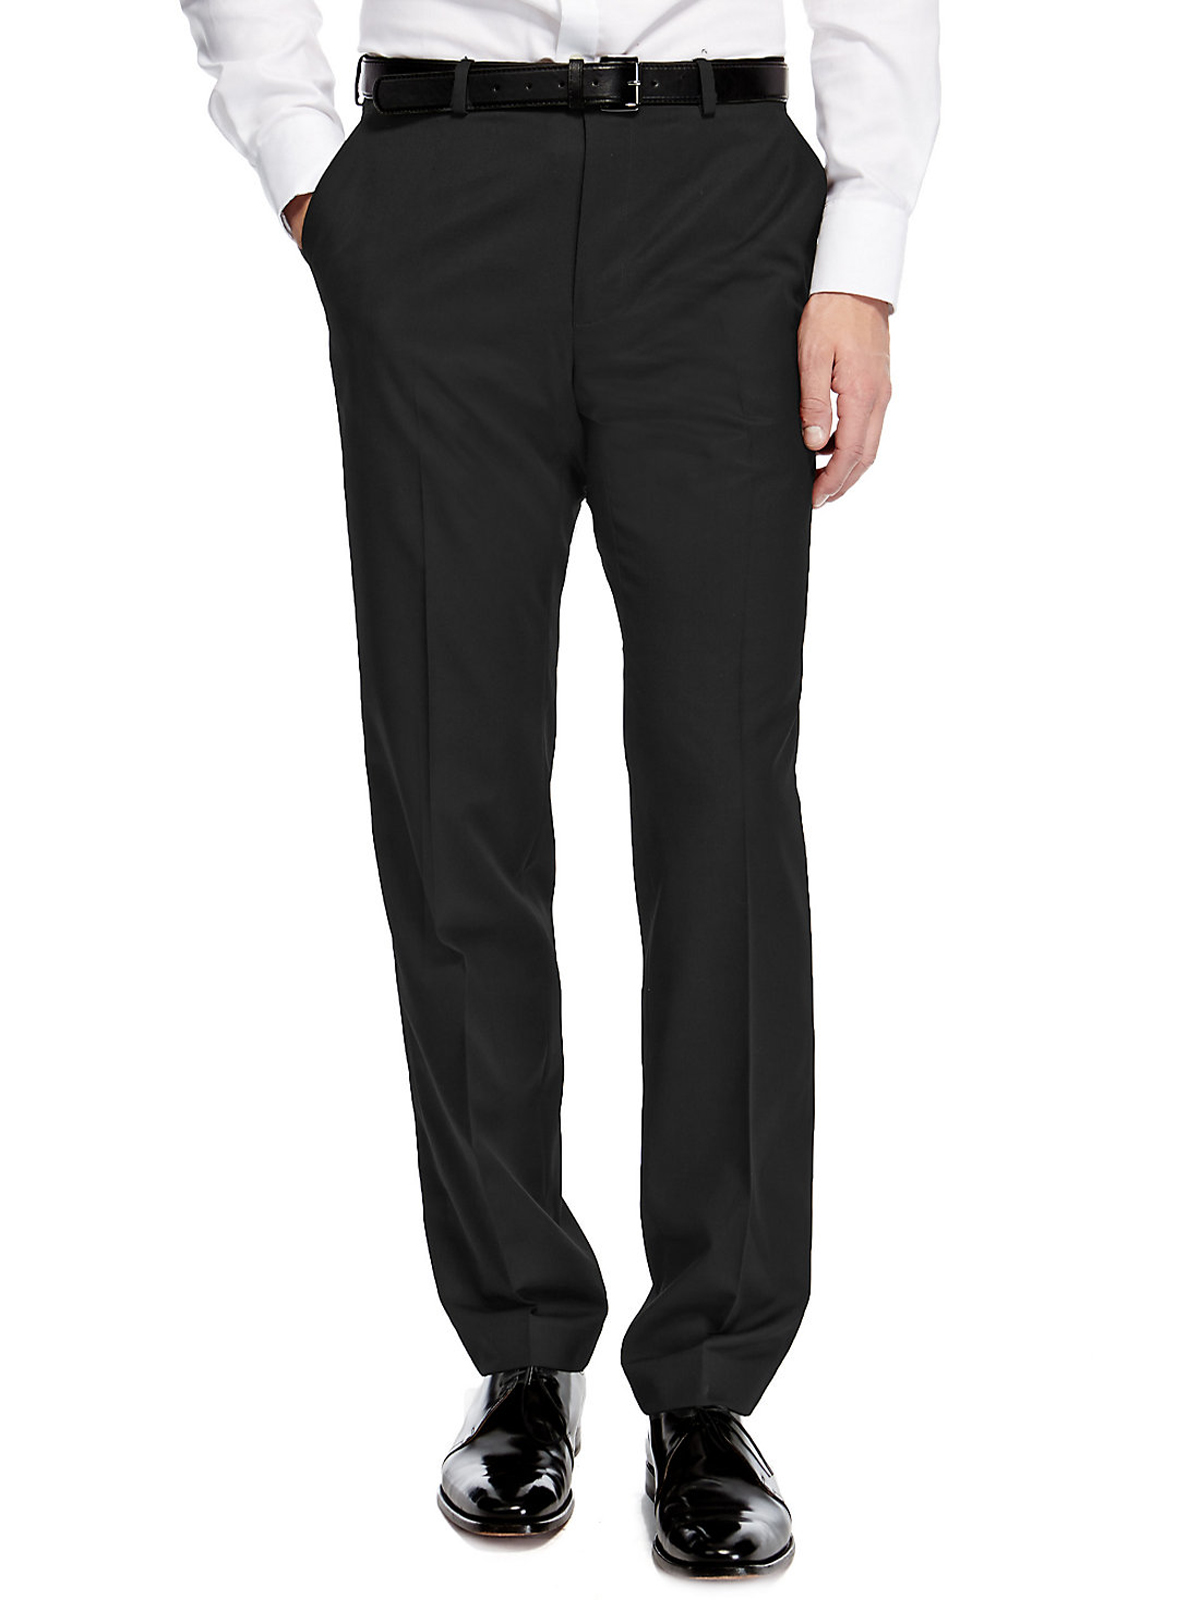 Marks and Spencer - - M&5 ASSORTED Mens Trousers - Waist Size 36 to 42 ...